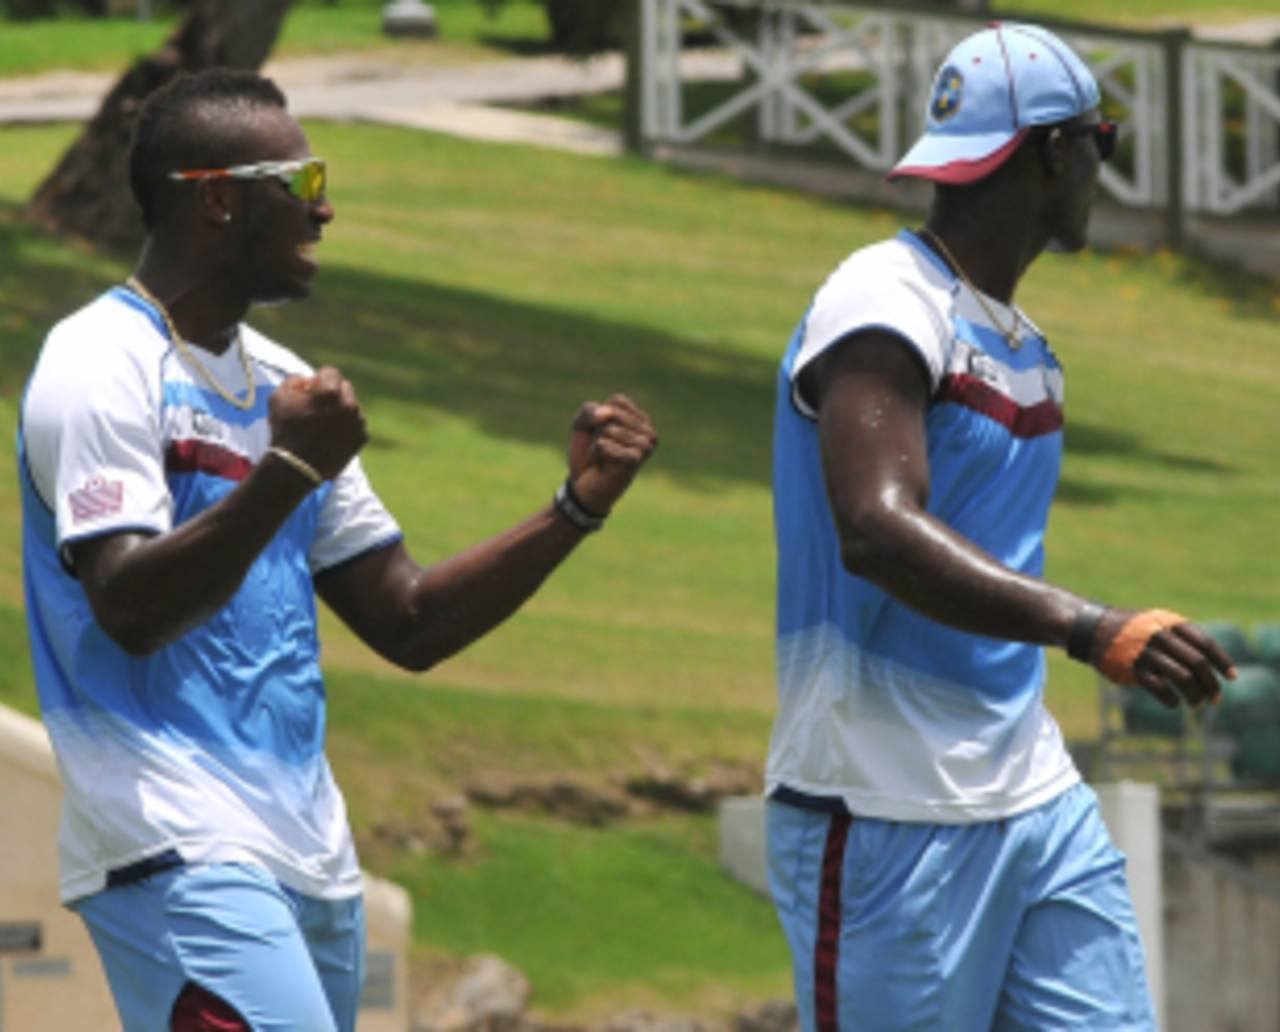 Andre Russell and Darren Sammy at practice, Barbados, September 6, 2012